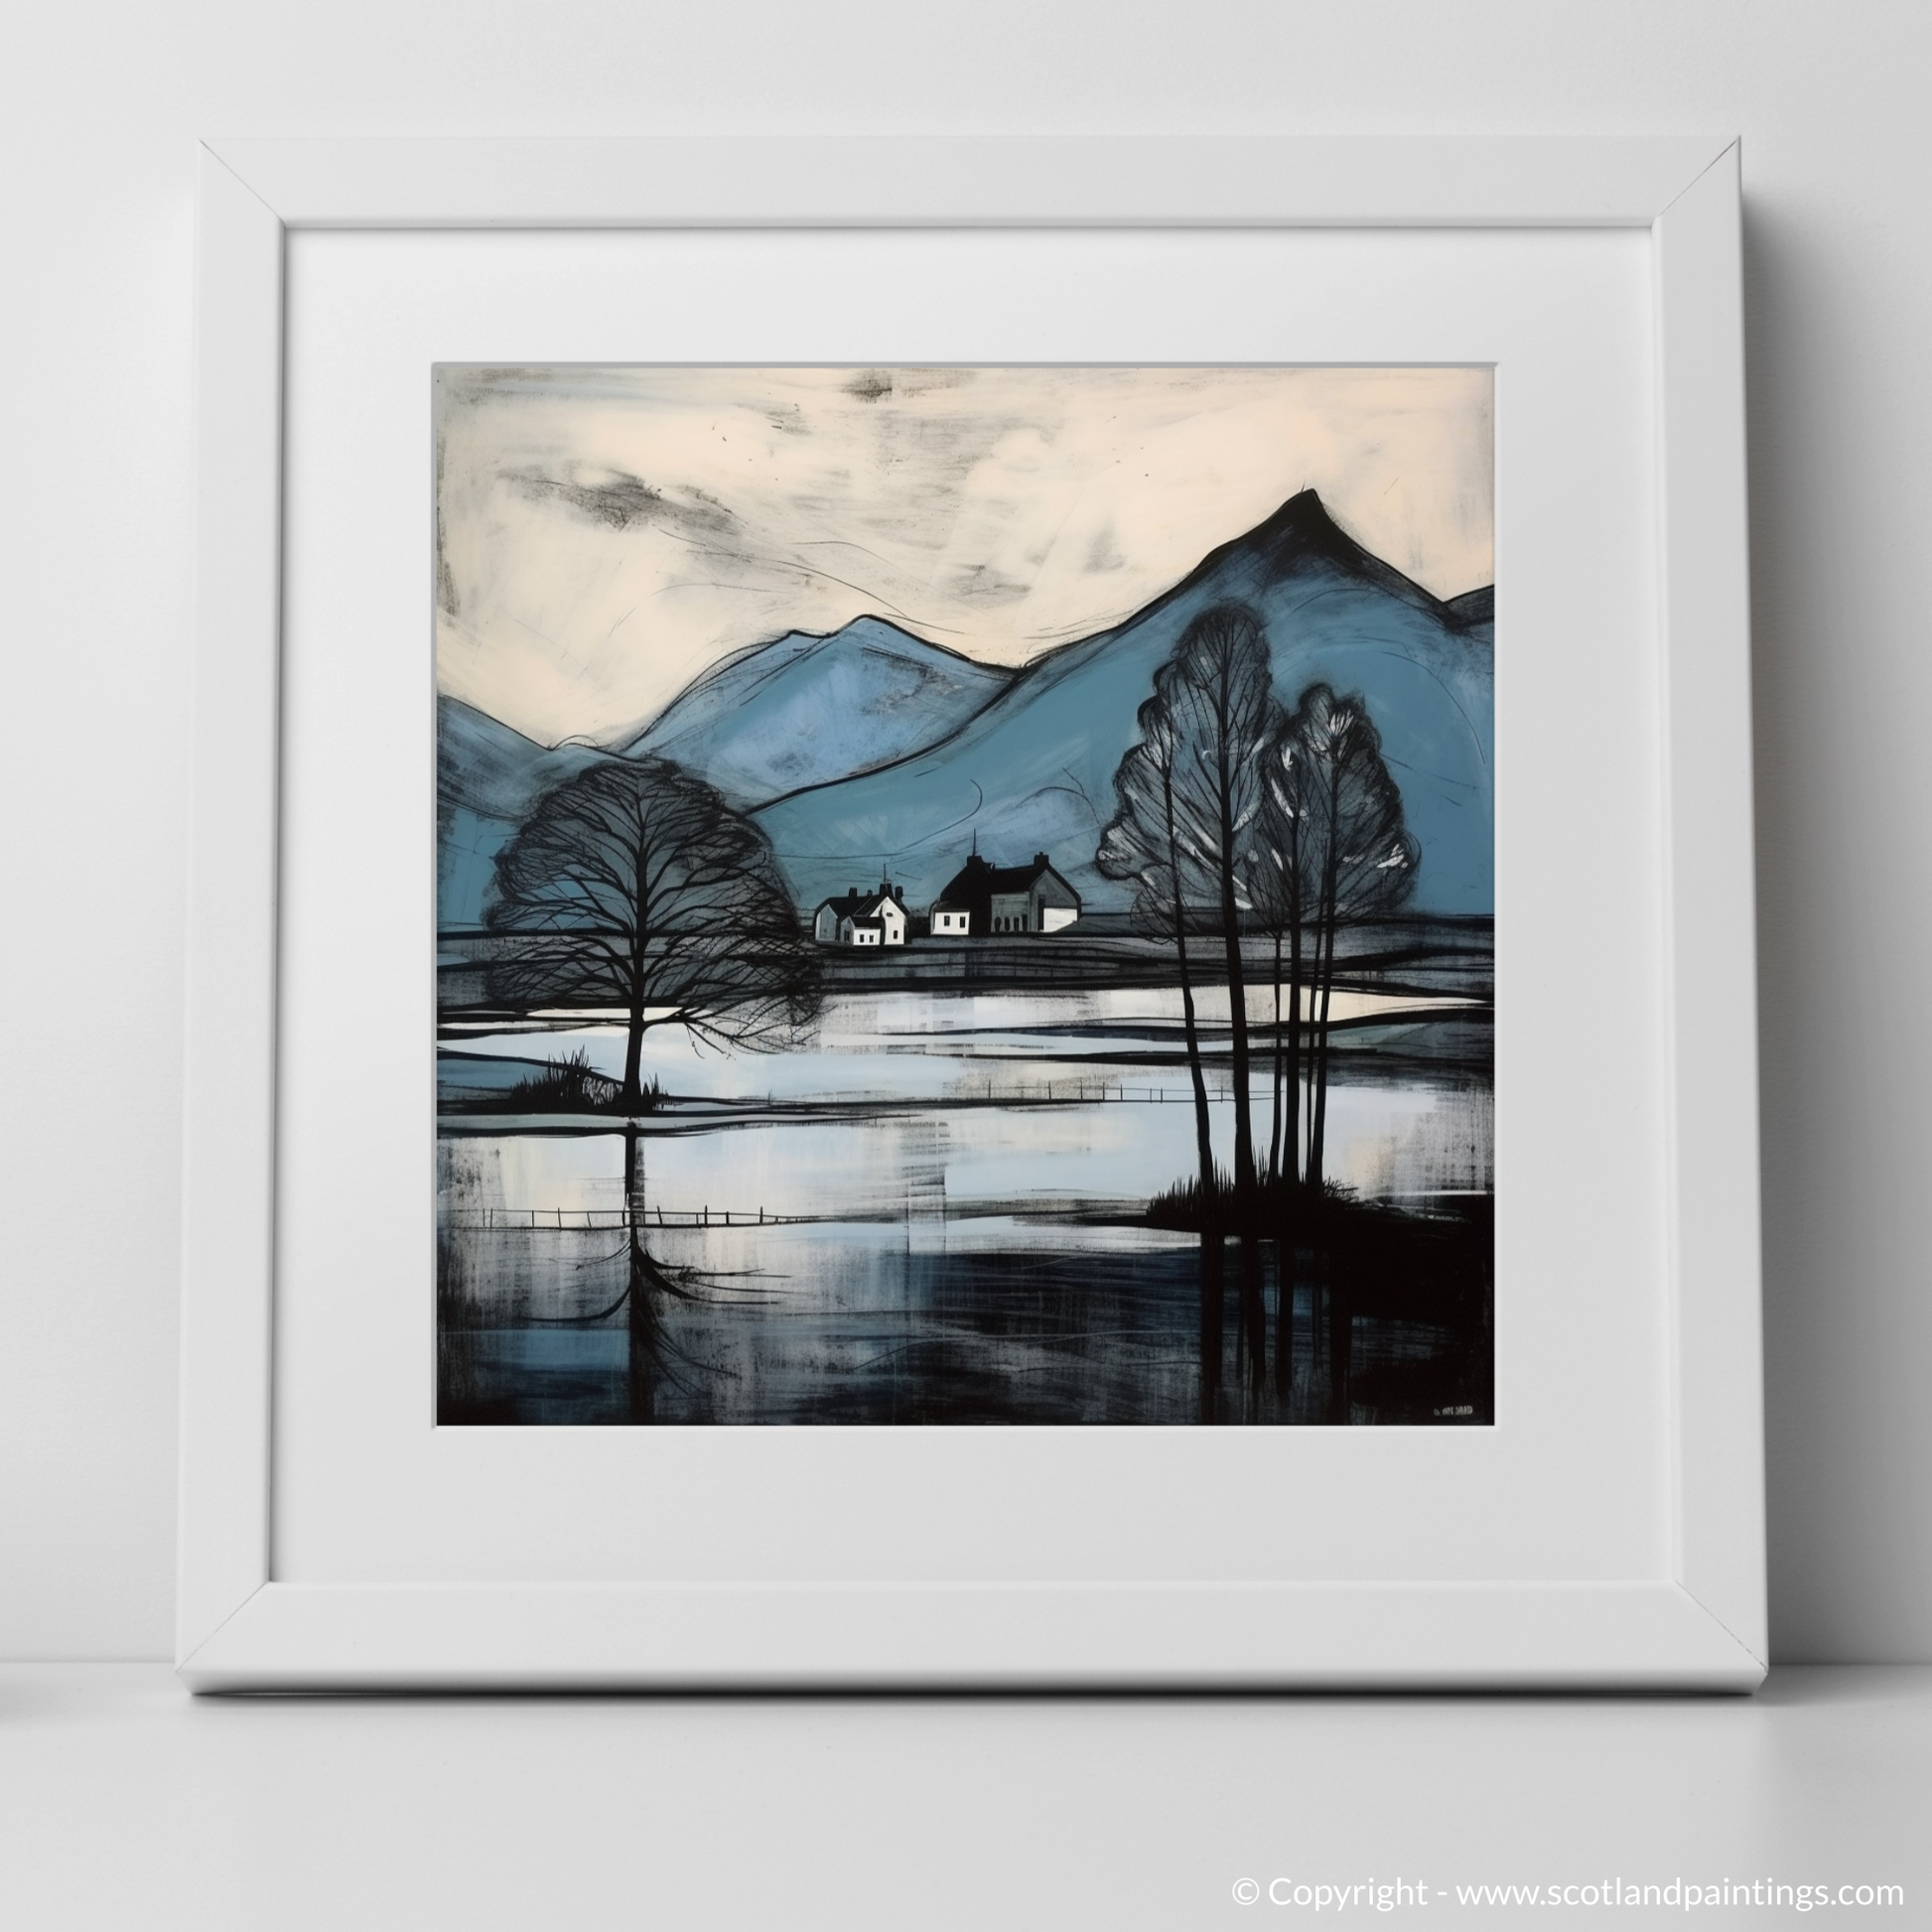 Art Print of Loch Awe, Argyll and Bute with a white frame